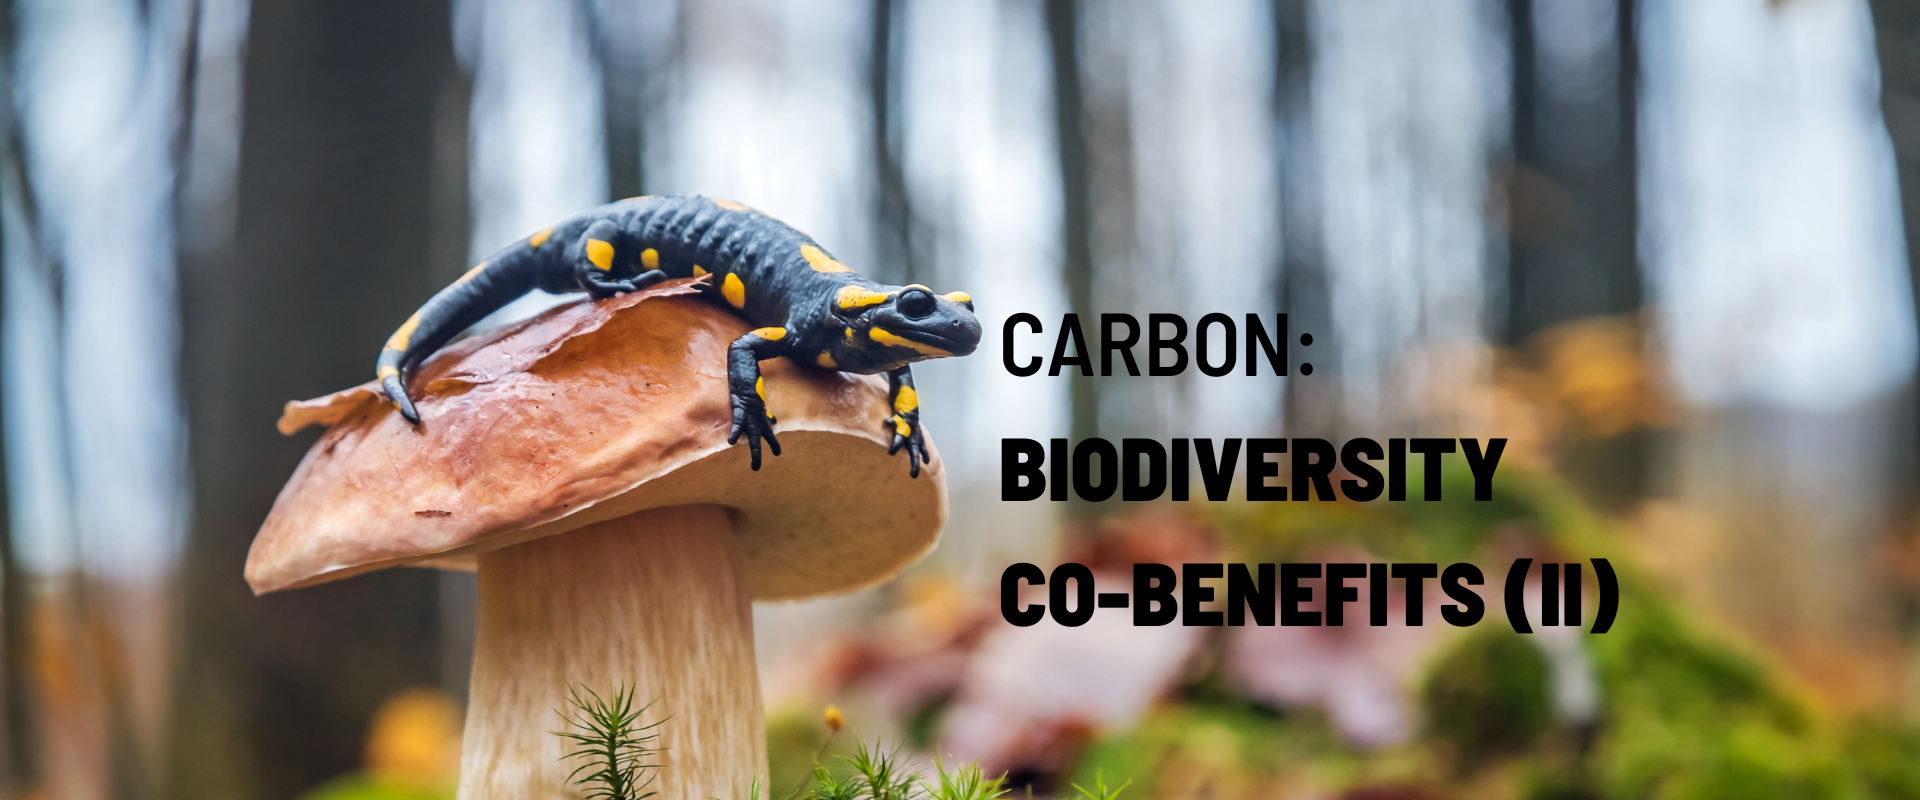 Carbon: Measuring and Valuing Biodiversity Co-Benefits (Part 2)